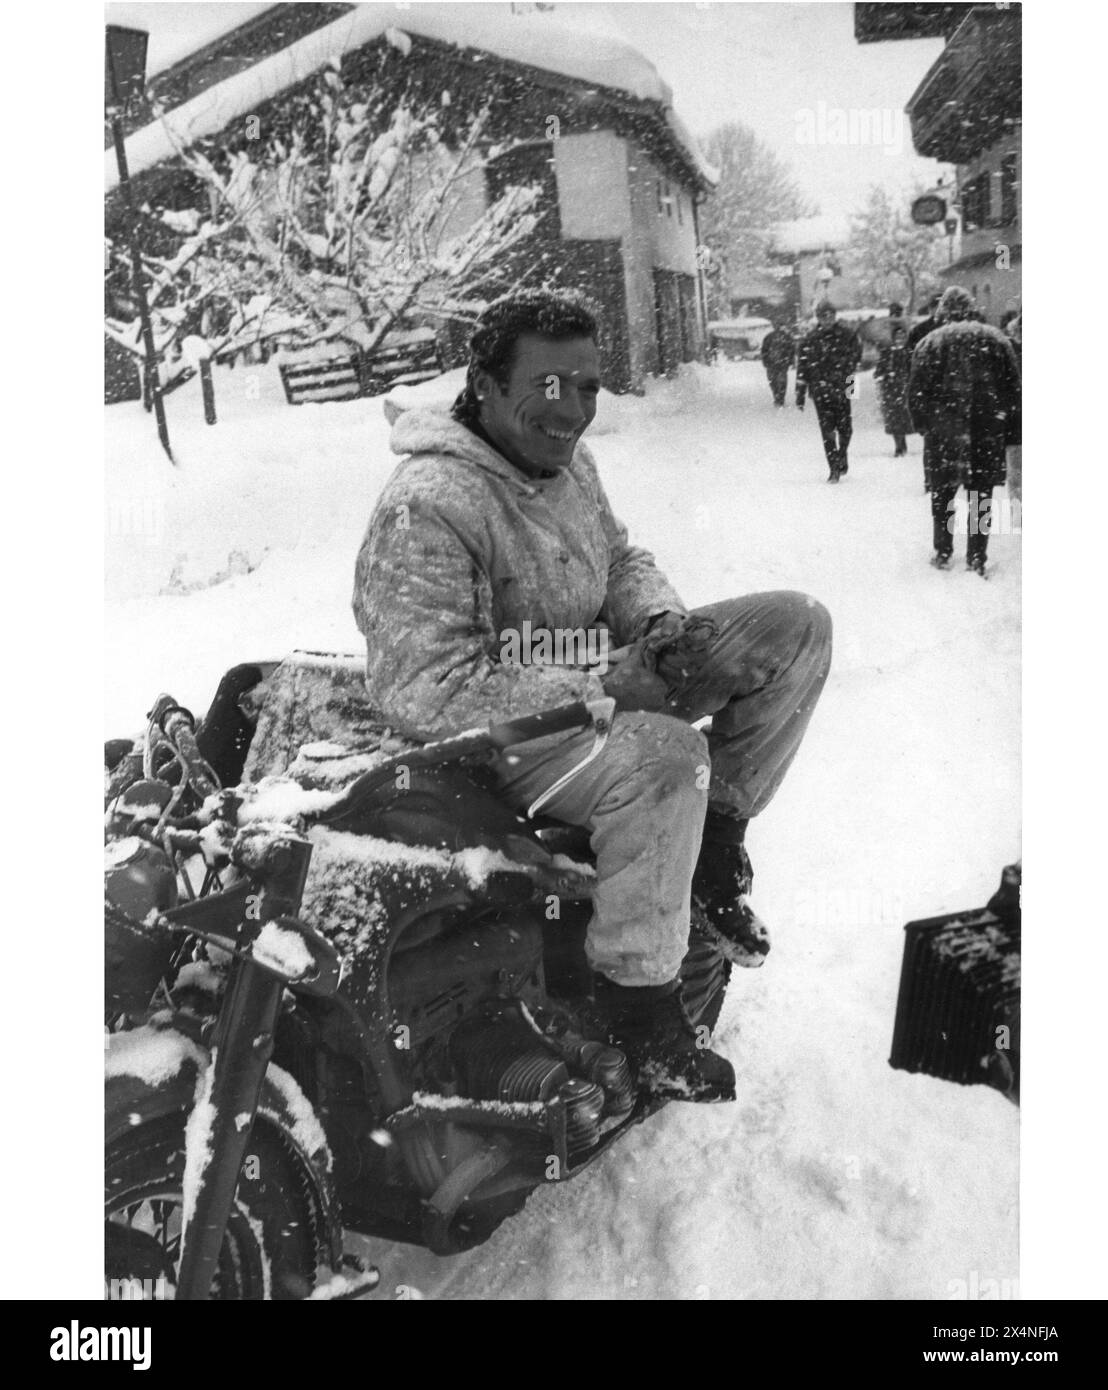 CLINT EASTWOOD on location in Austria for WHERE EAGLES DARE 1968 Director BRIAN G. HUTTON Story and screenplay ALISTAIR MacLEAN Music RON GOODWIN Gershwin-Kastner Productions / Winkast Film Productions / Metro Goldwyn Mayer Stock Photo